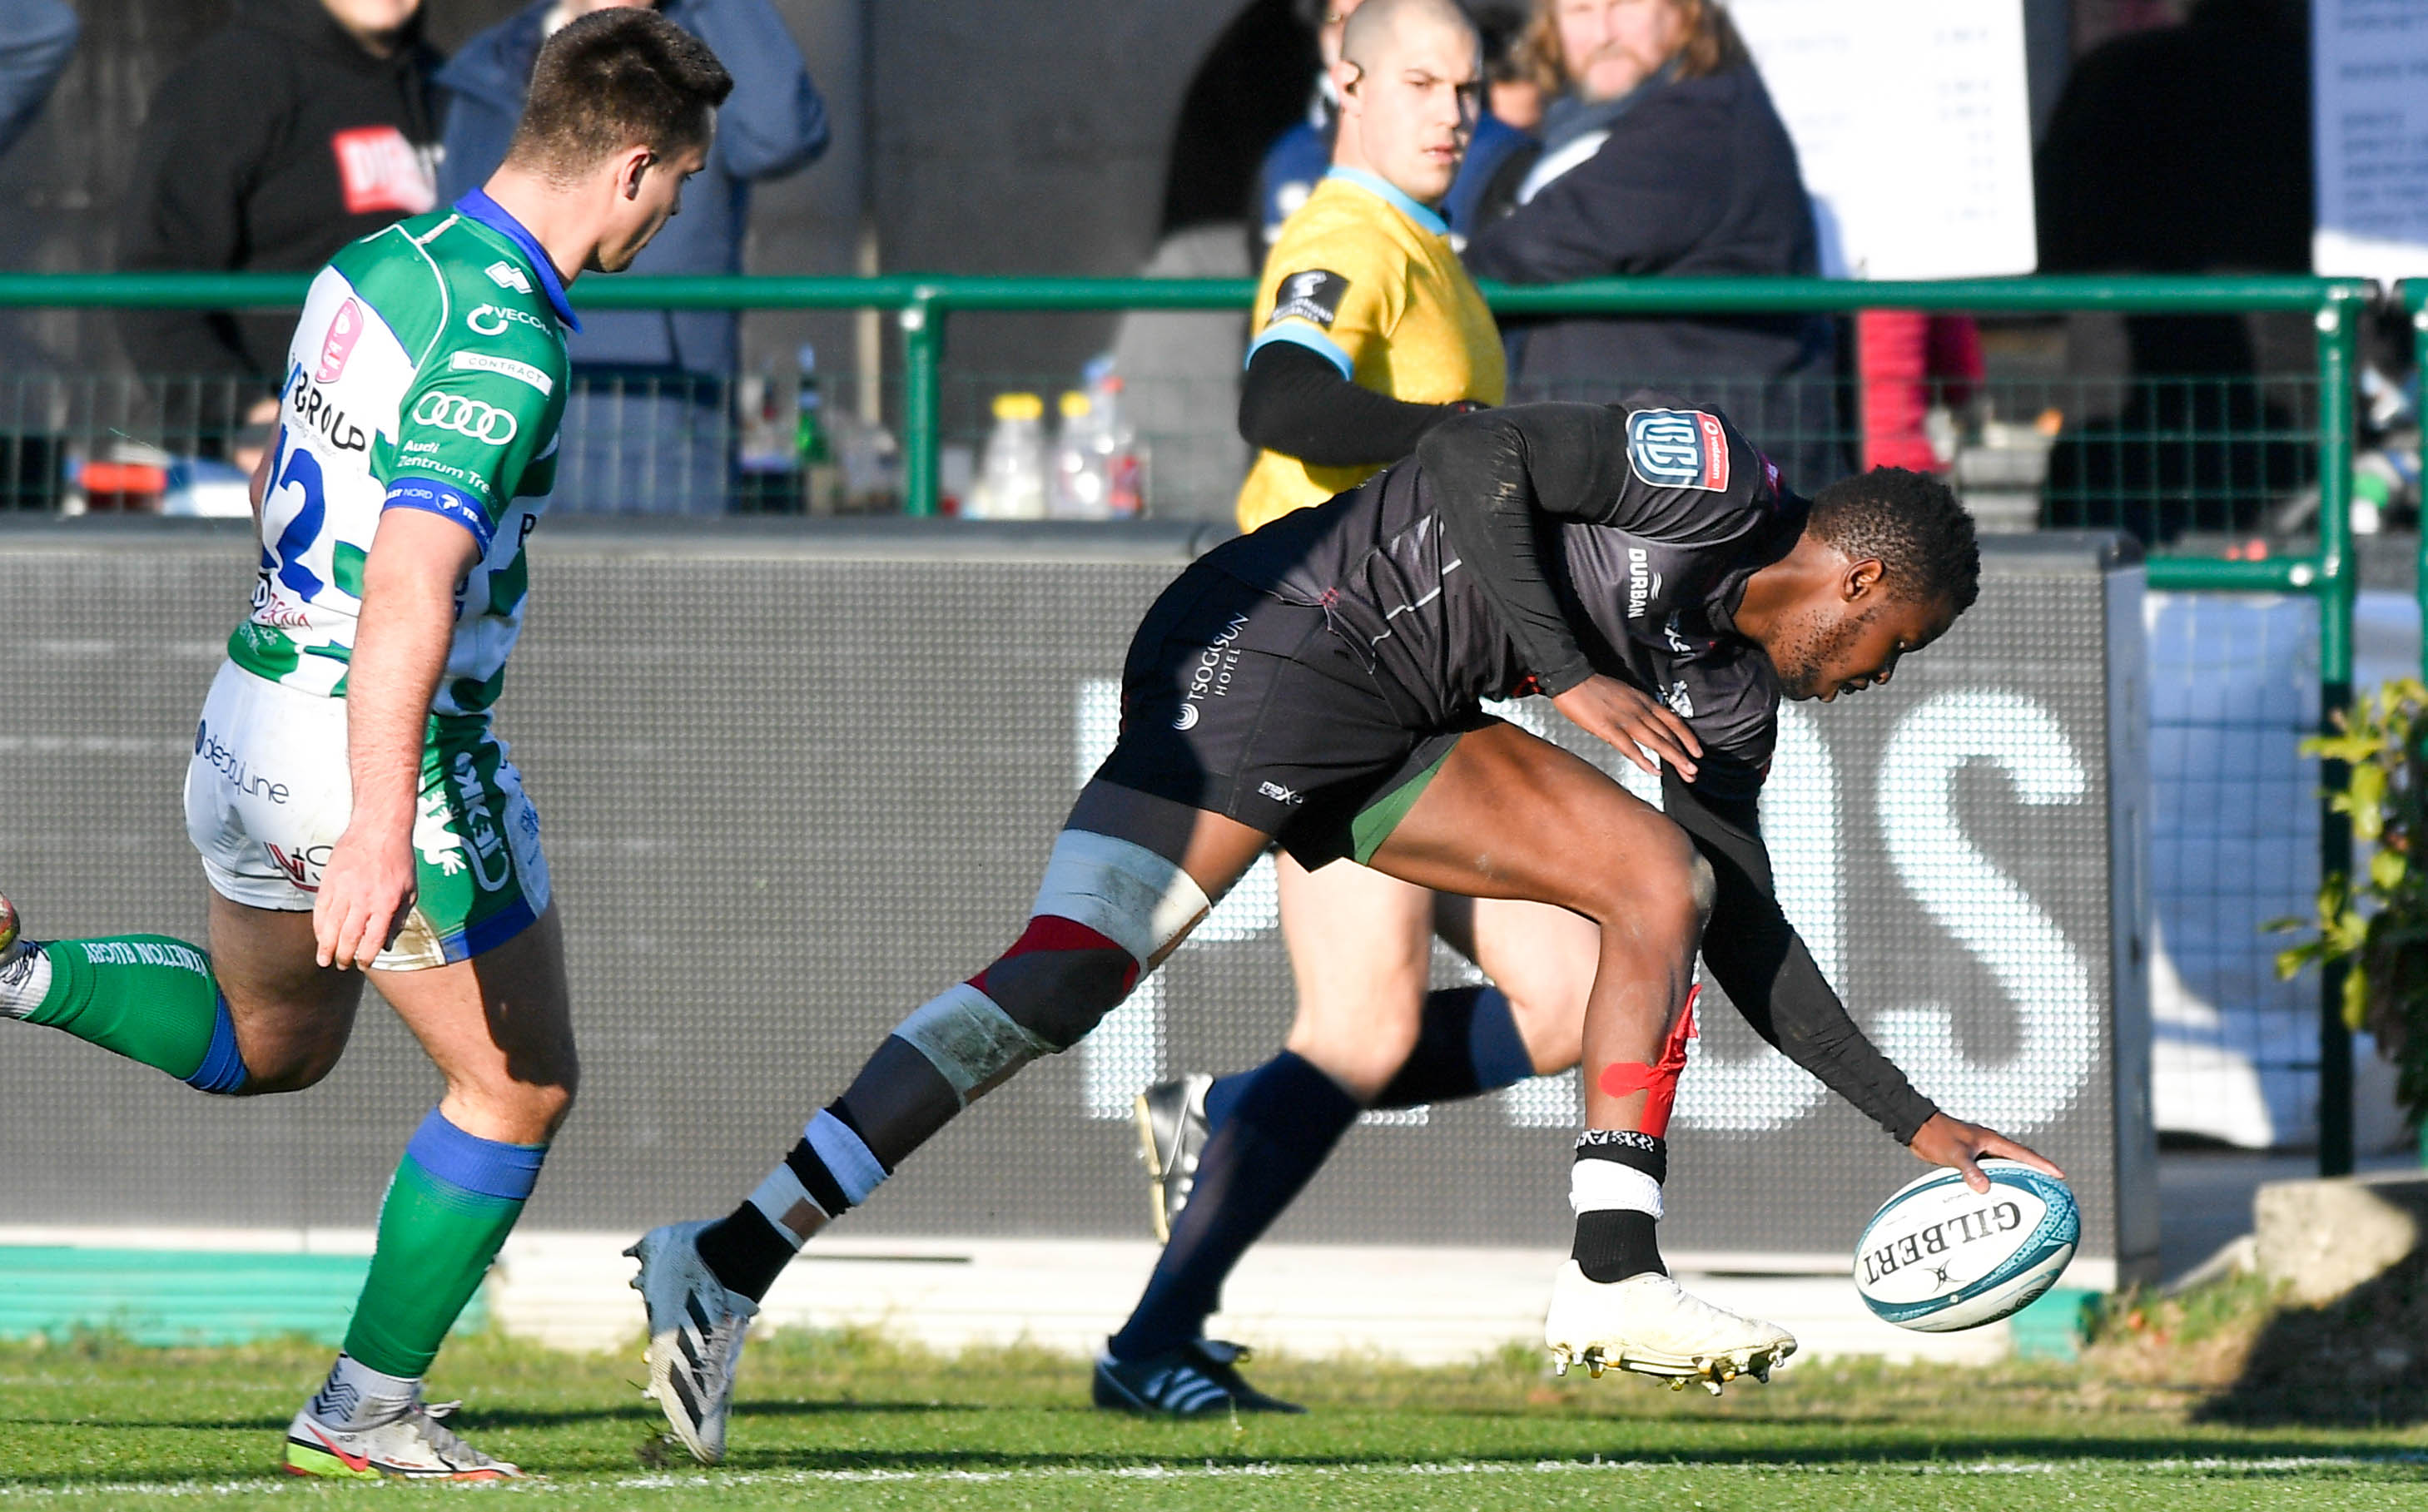 Mandatory Credit: Photo by Luca Sighniolfi/INPHO/Shutterstock/BackpagePix (12824431p) Benetton Rugby vs Cell C Sharks. Sharks' Aphelele Fassi scores their second try United Rugby Championship, Stadio Monigo, Treviso, Italy - 26 Feb 2022